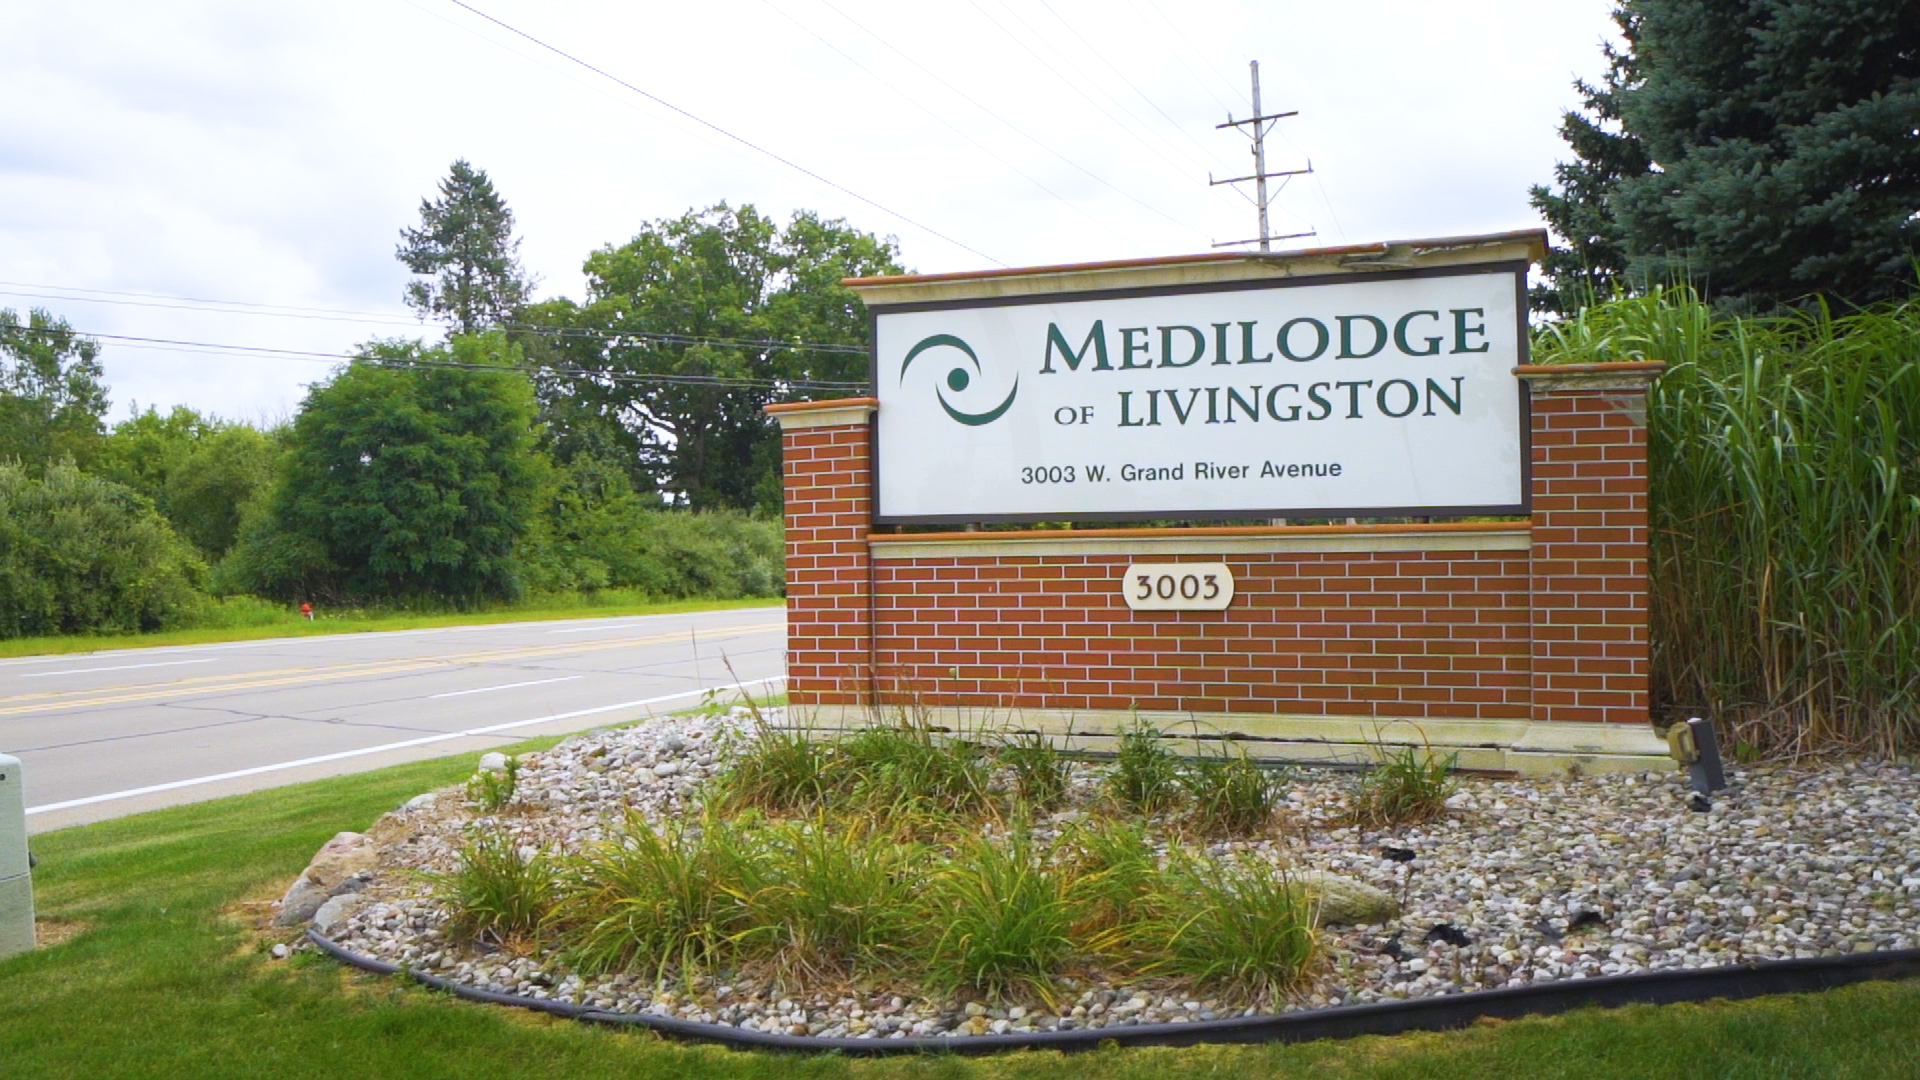 Medilodge of Livingston Sign in front of the building.